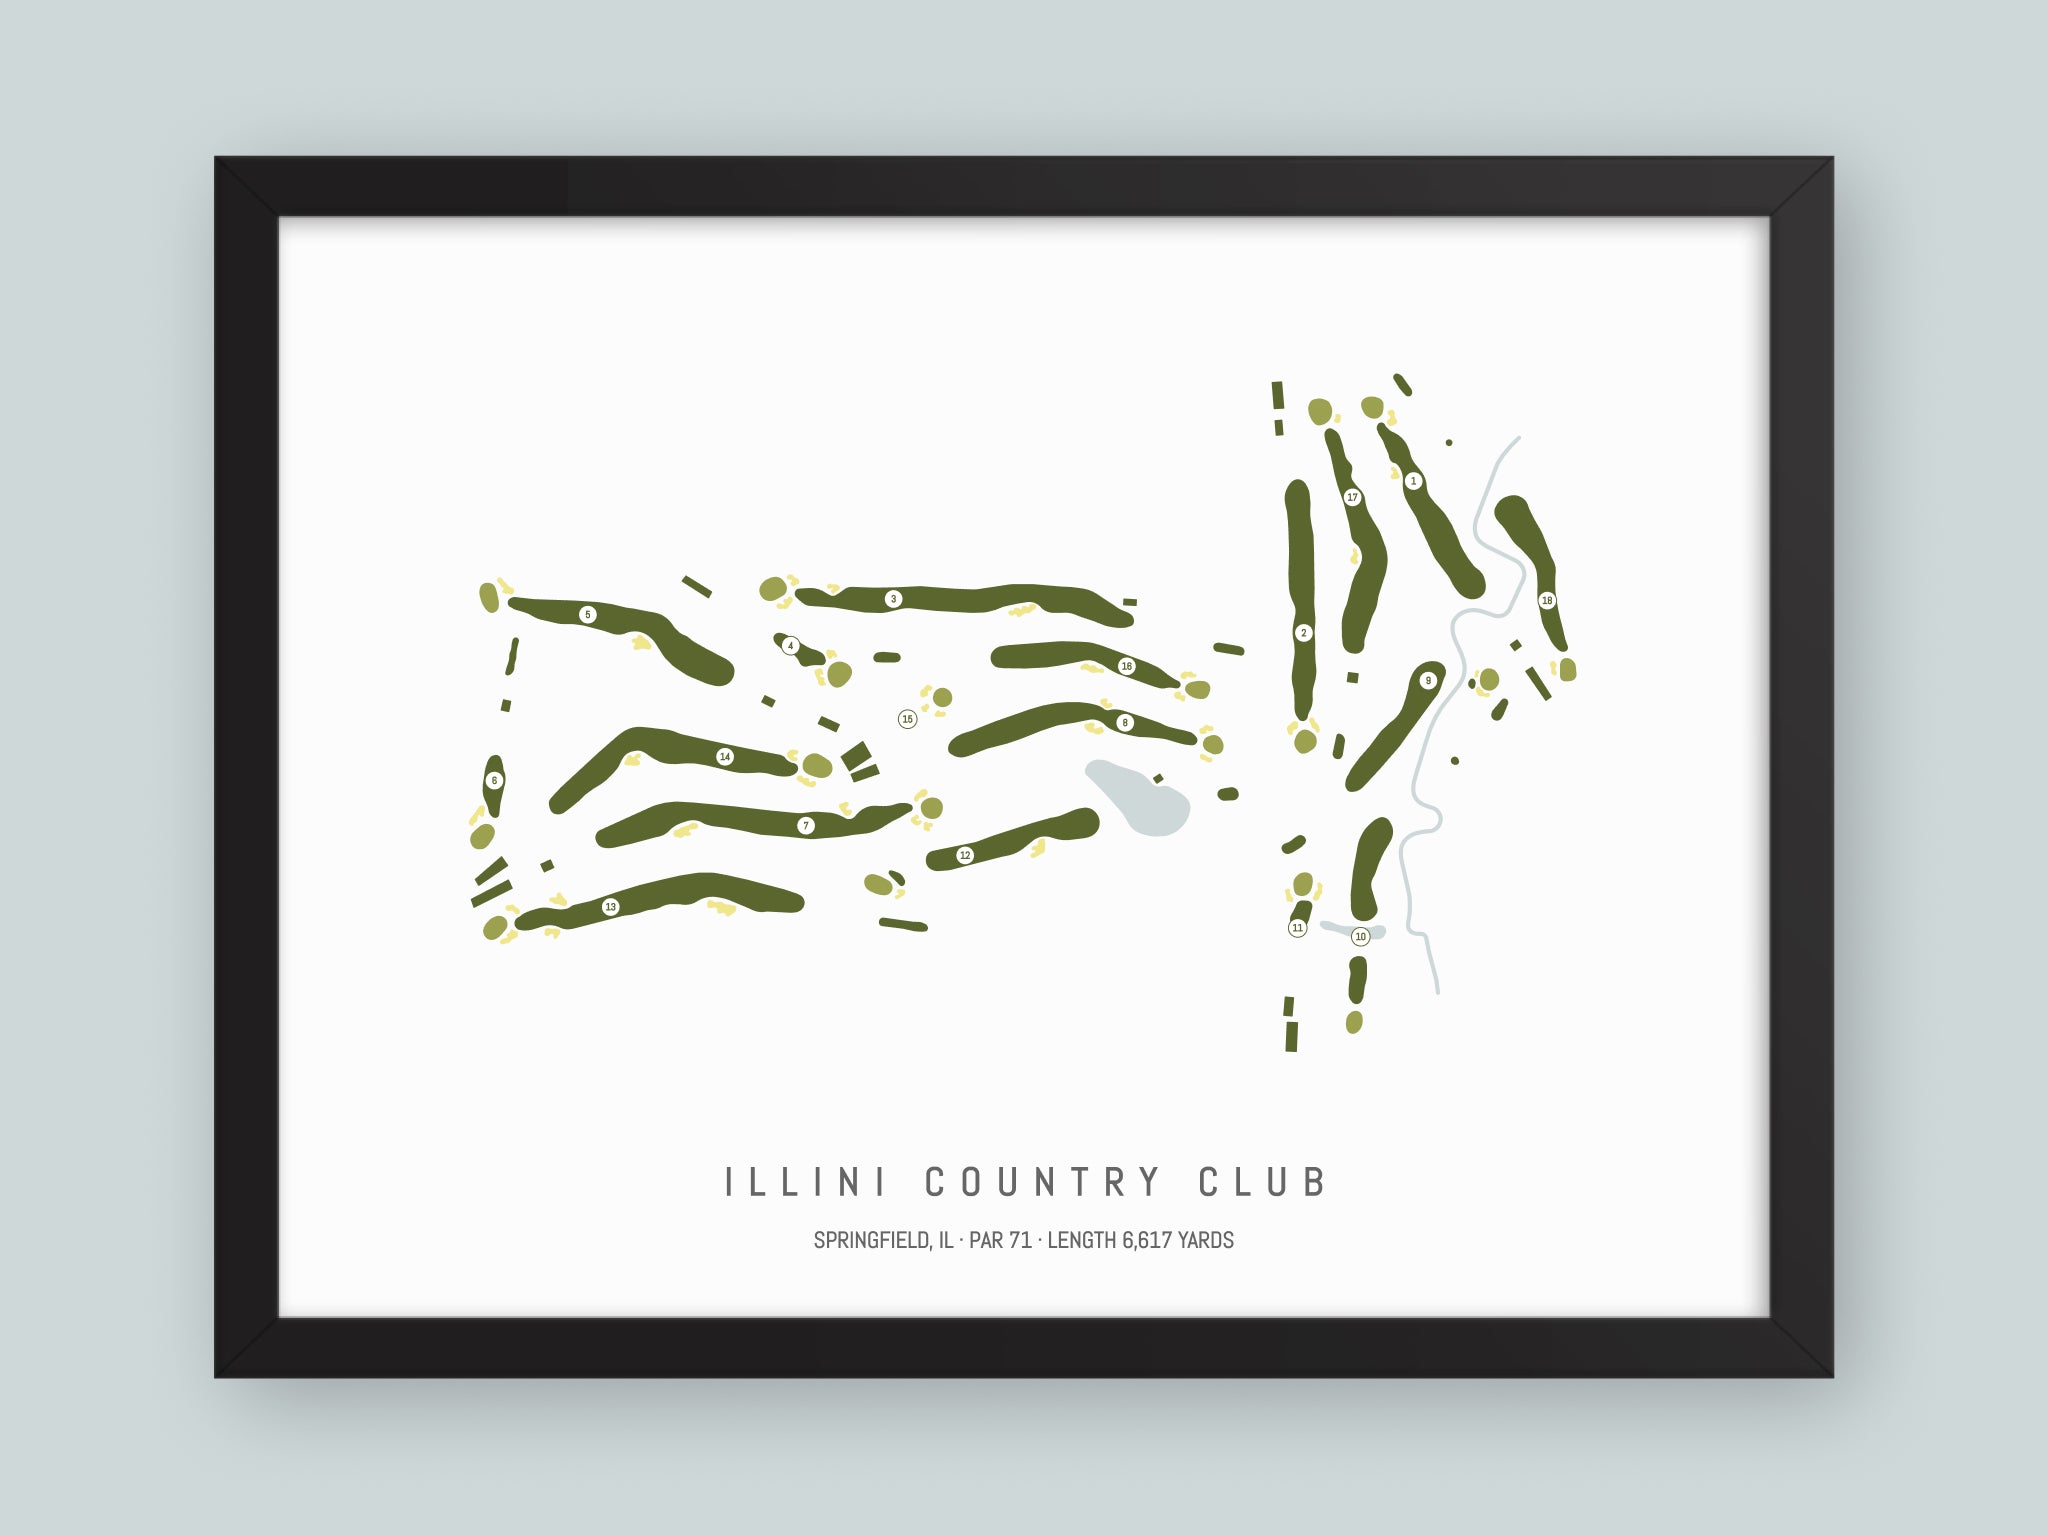 Illini-Country-Club-IL--Black-Frame-24x18-With-Hole-Numbers